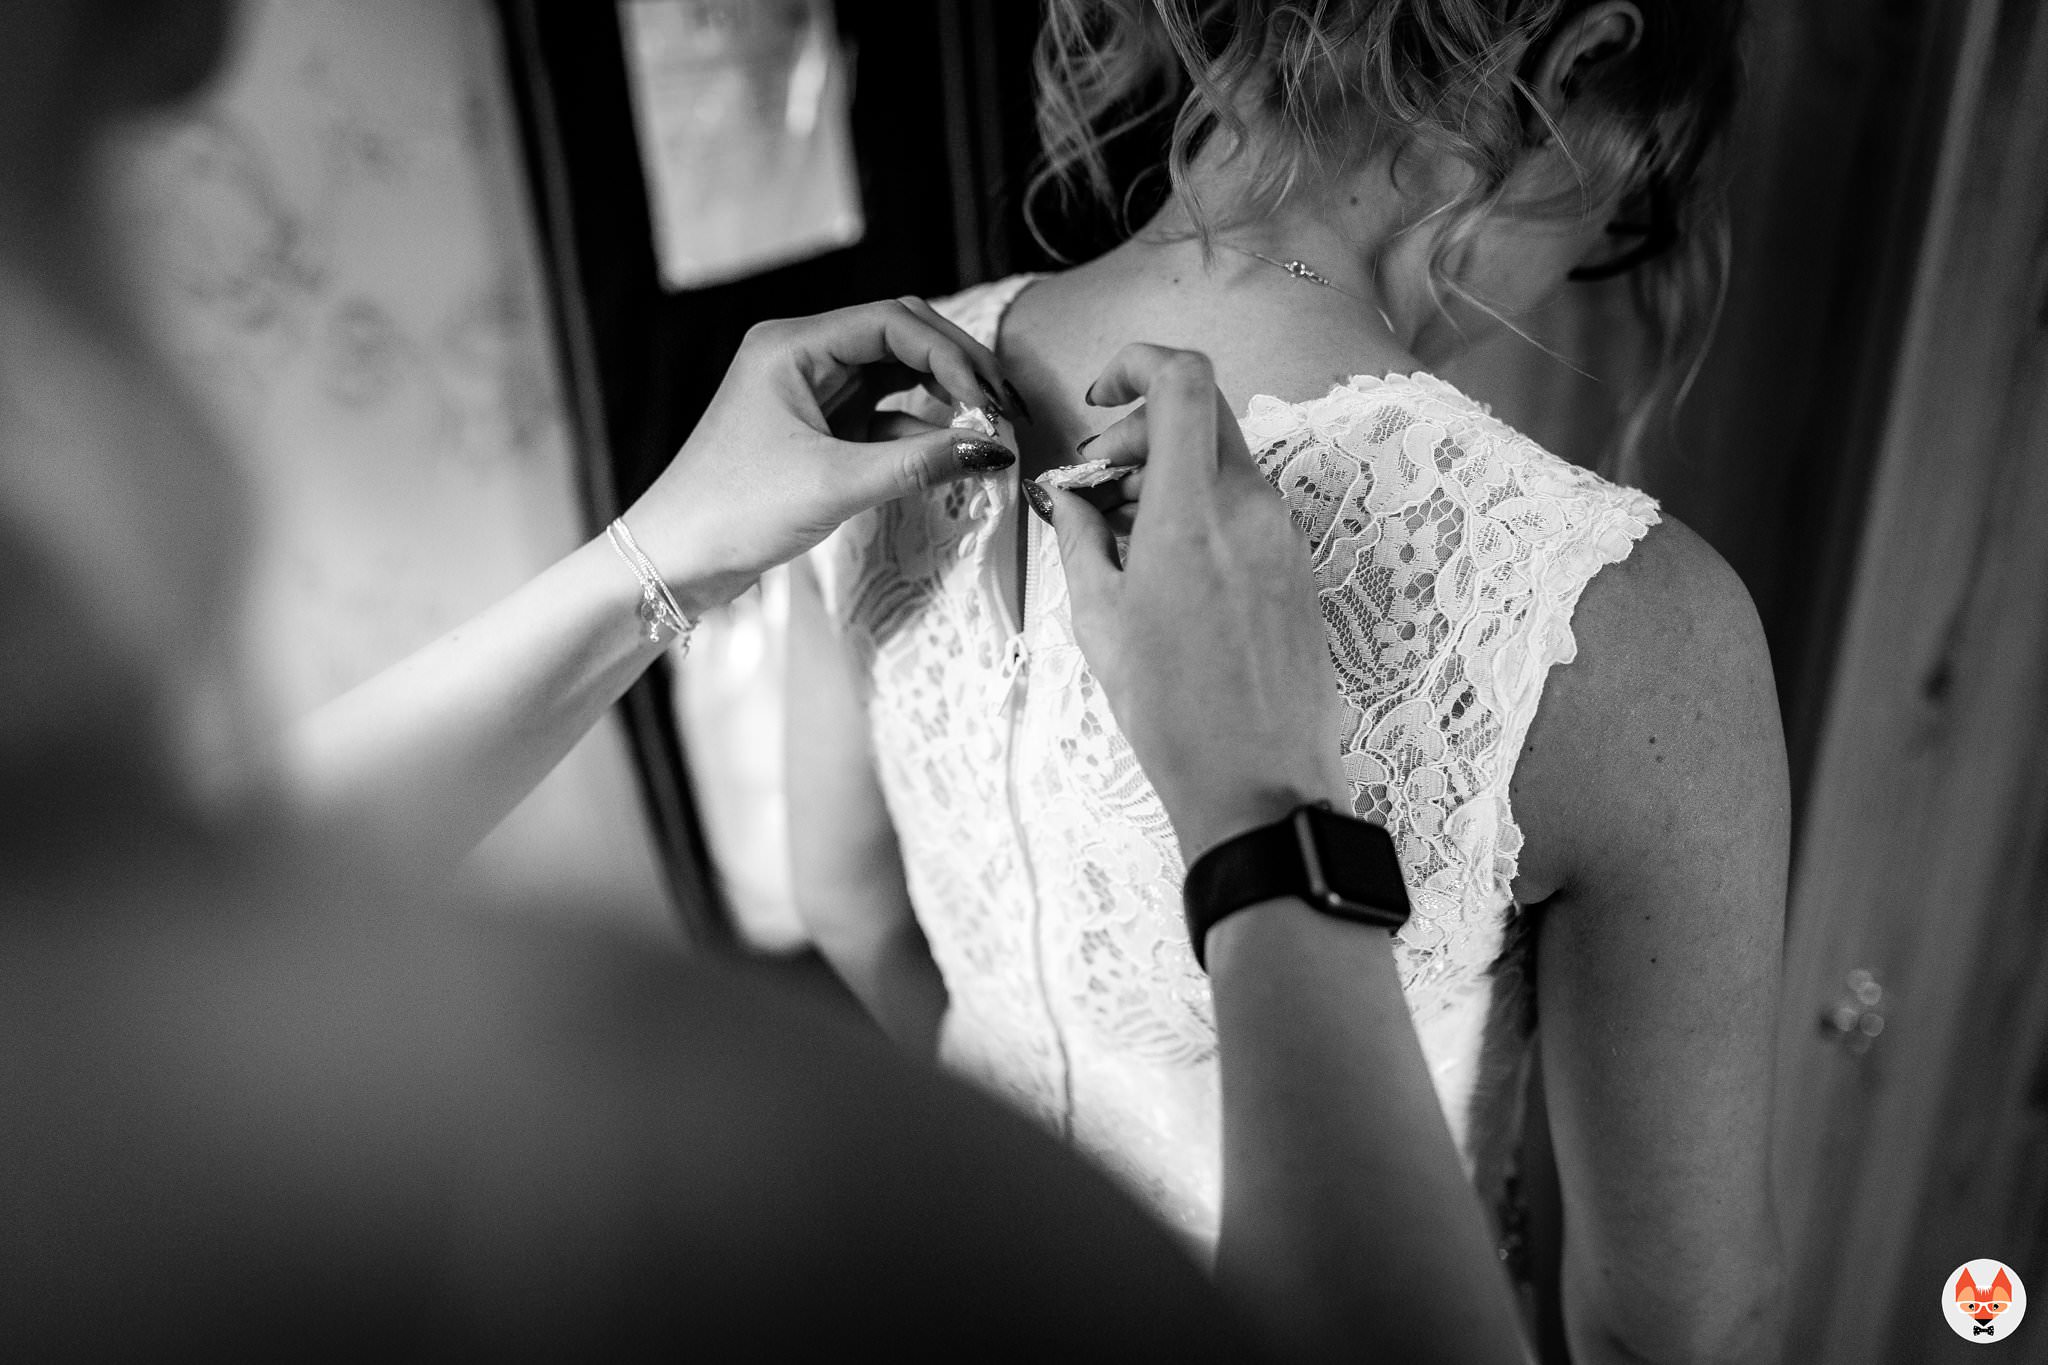 buttoning up the wedding dress